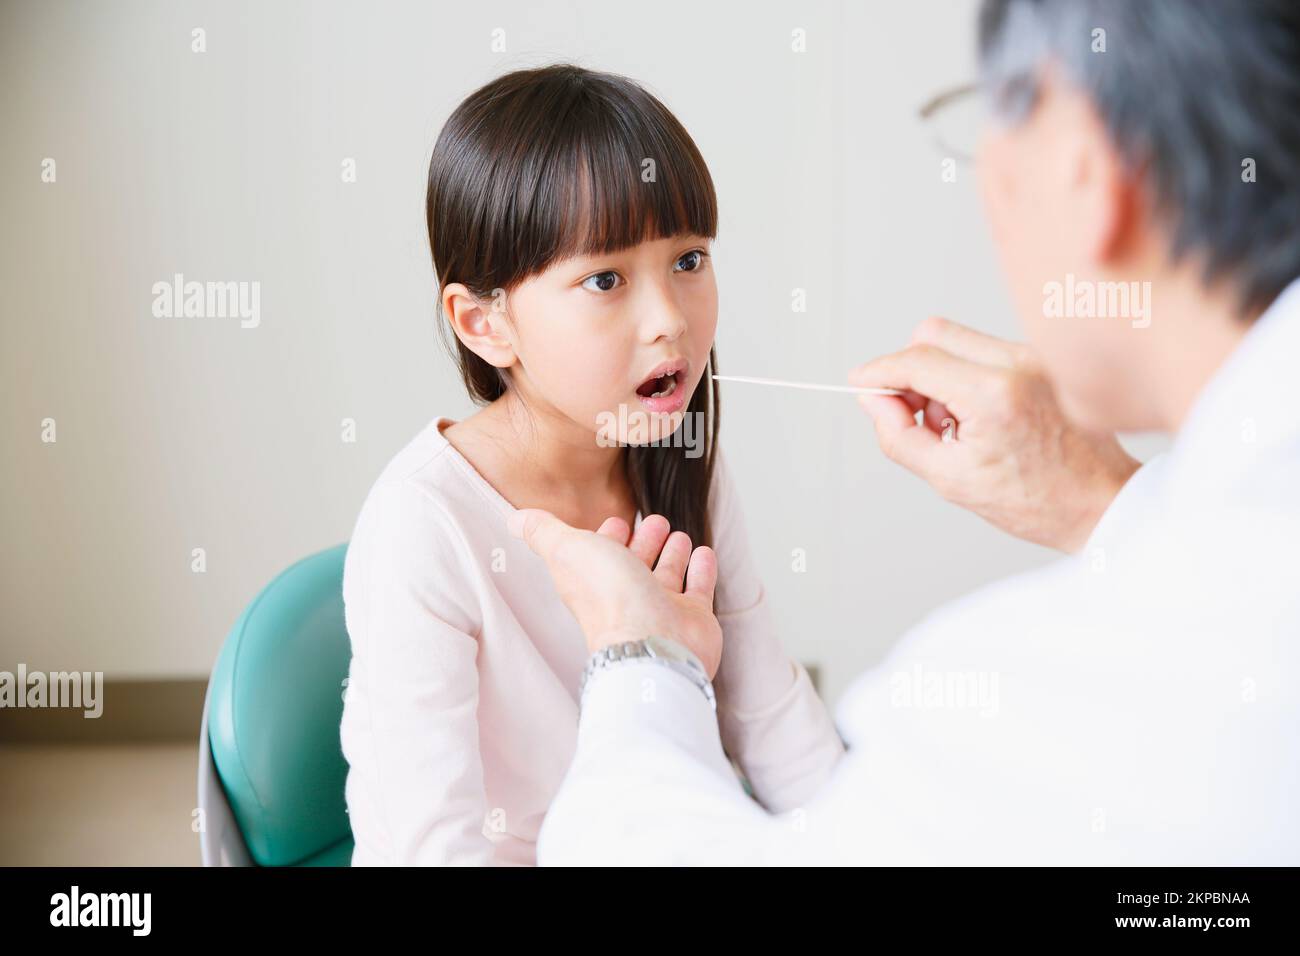 Japanese girl being examined by a doctor Stock Photo